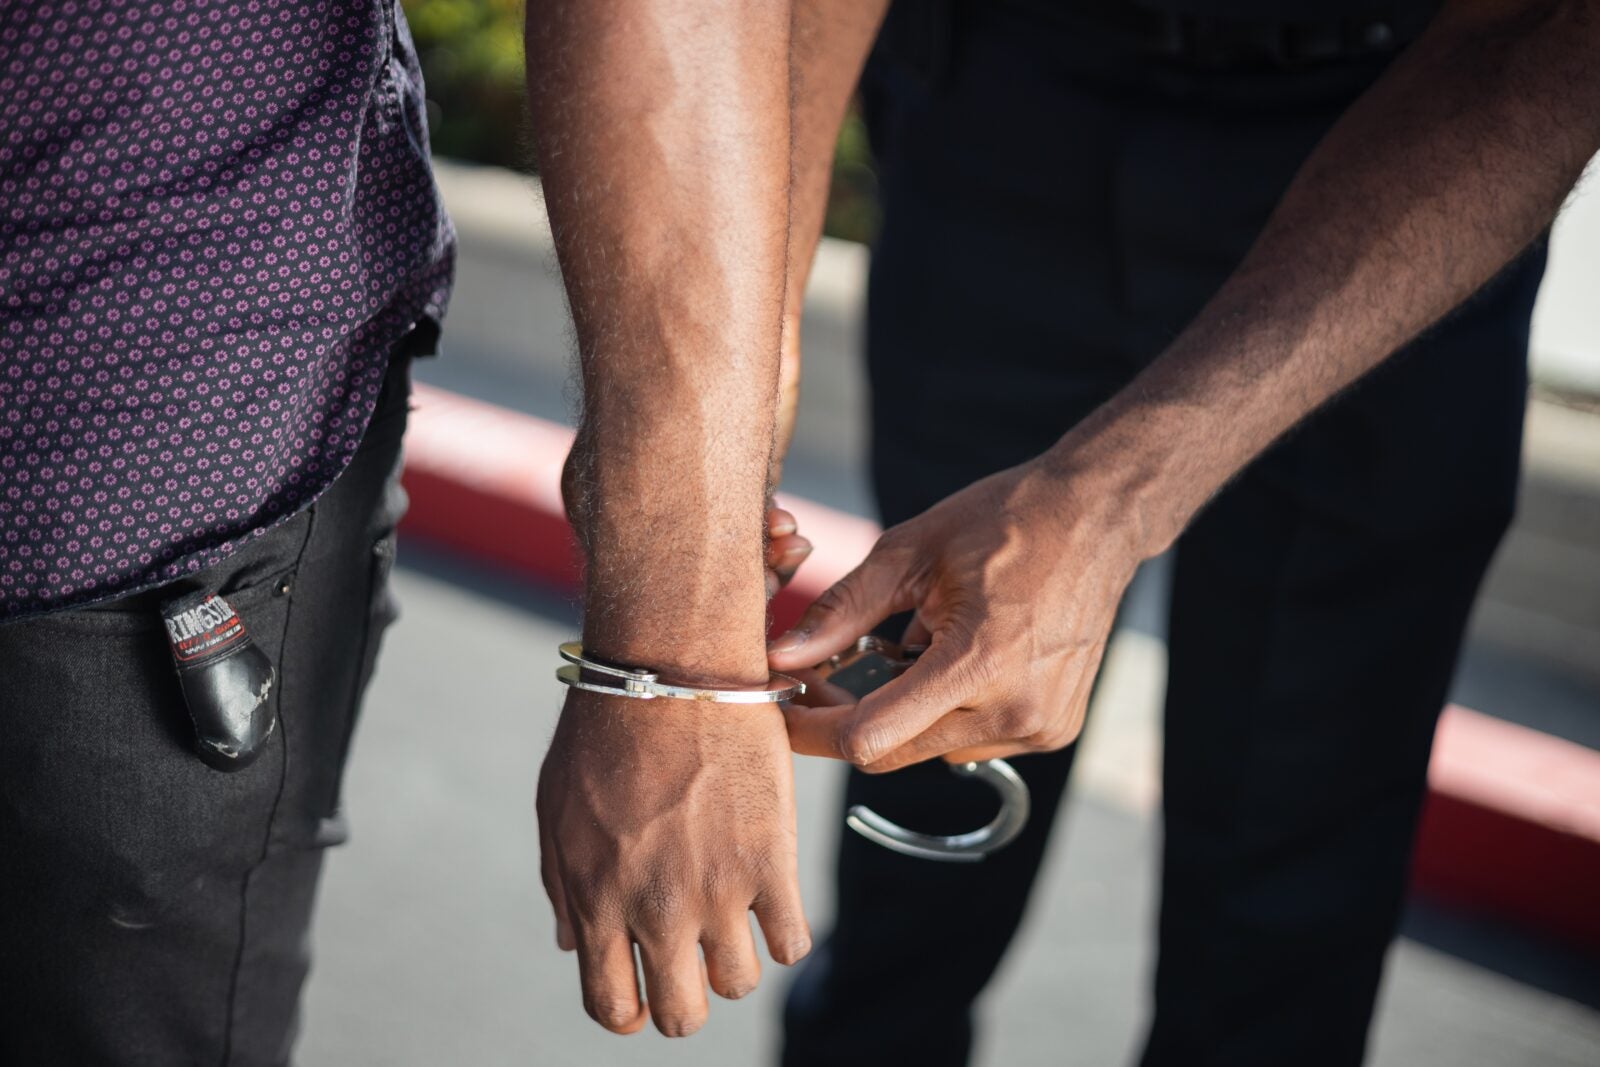 A dark skinned man's hands being hand cuffed by another dark skinned man.